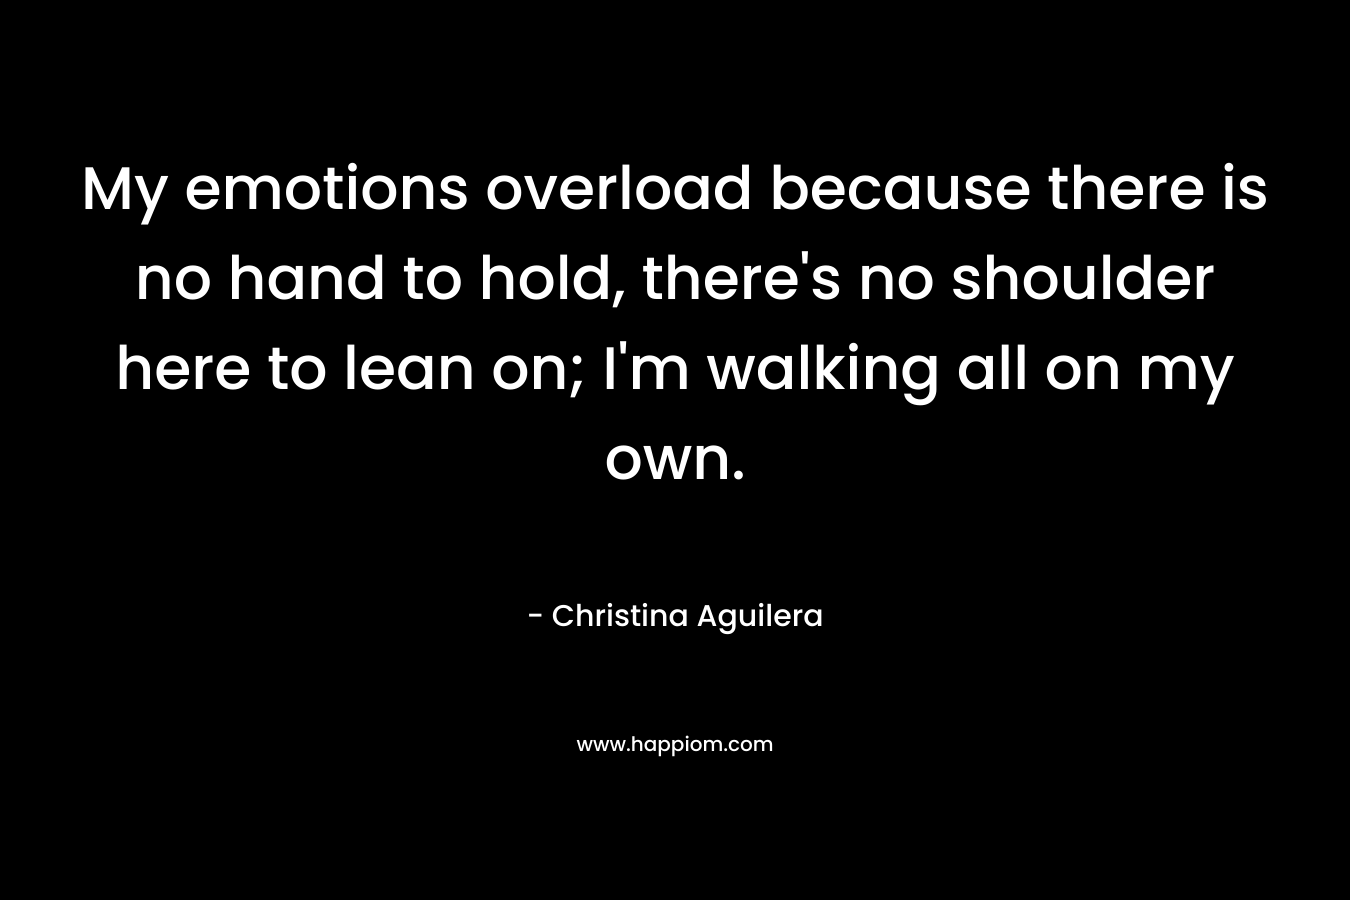 My emotions overload because there is no hand to hold, there’s no shoulder here to lean on; I’m walking all on my own. – Christina Aguilera